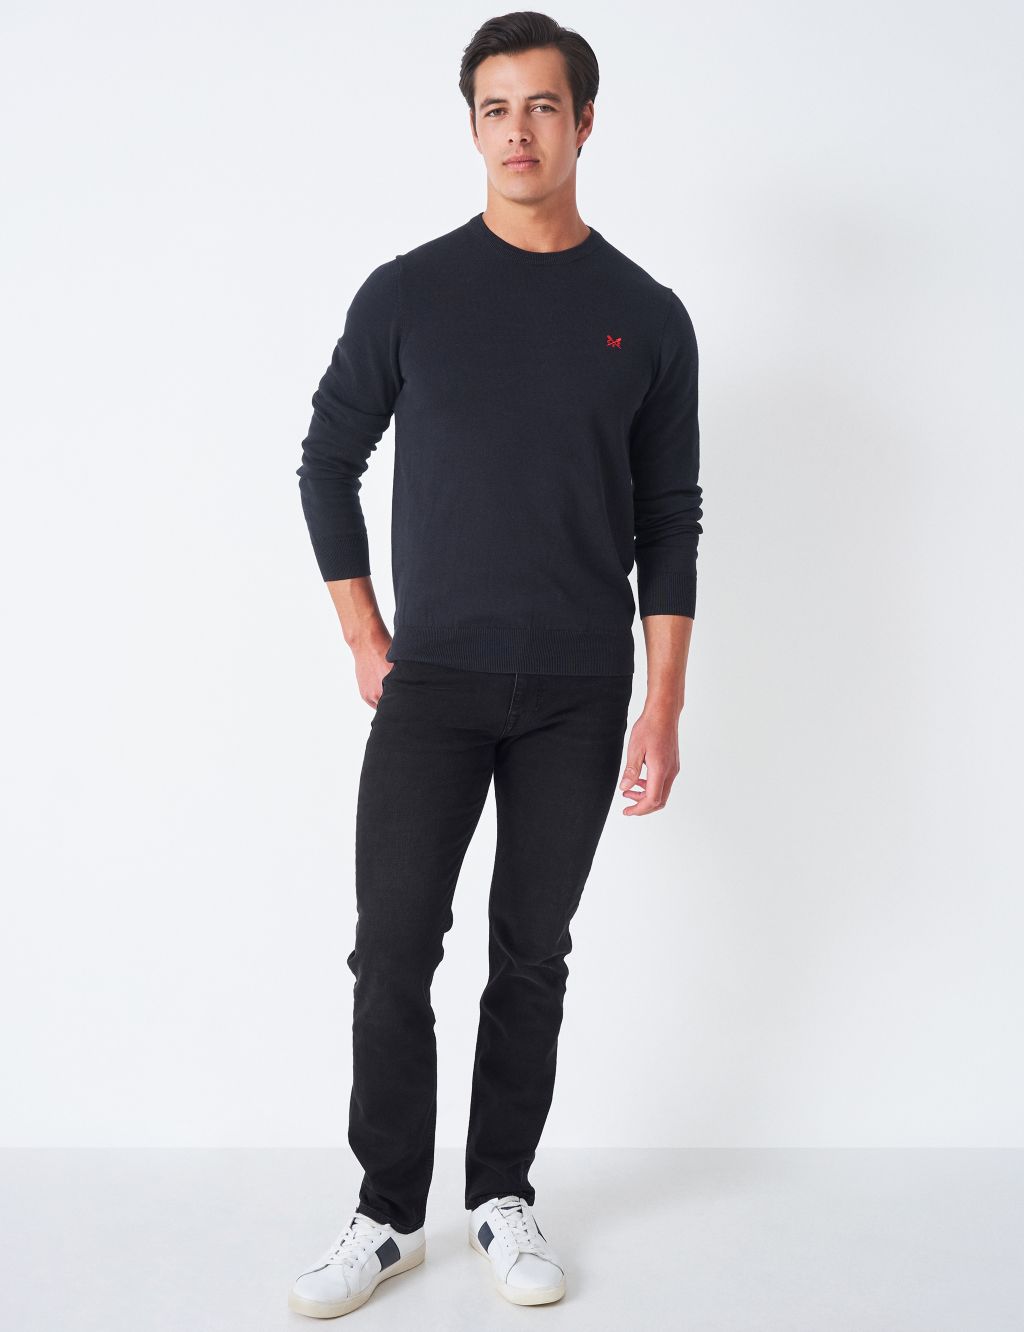 Straight Fit Jeans | Crew Clothing | M&S